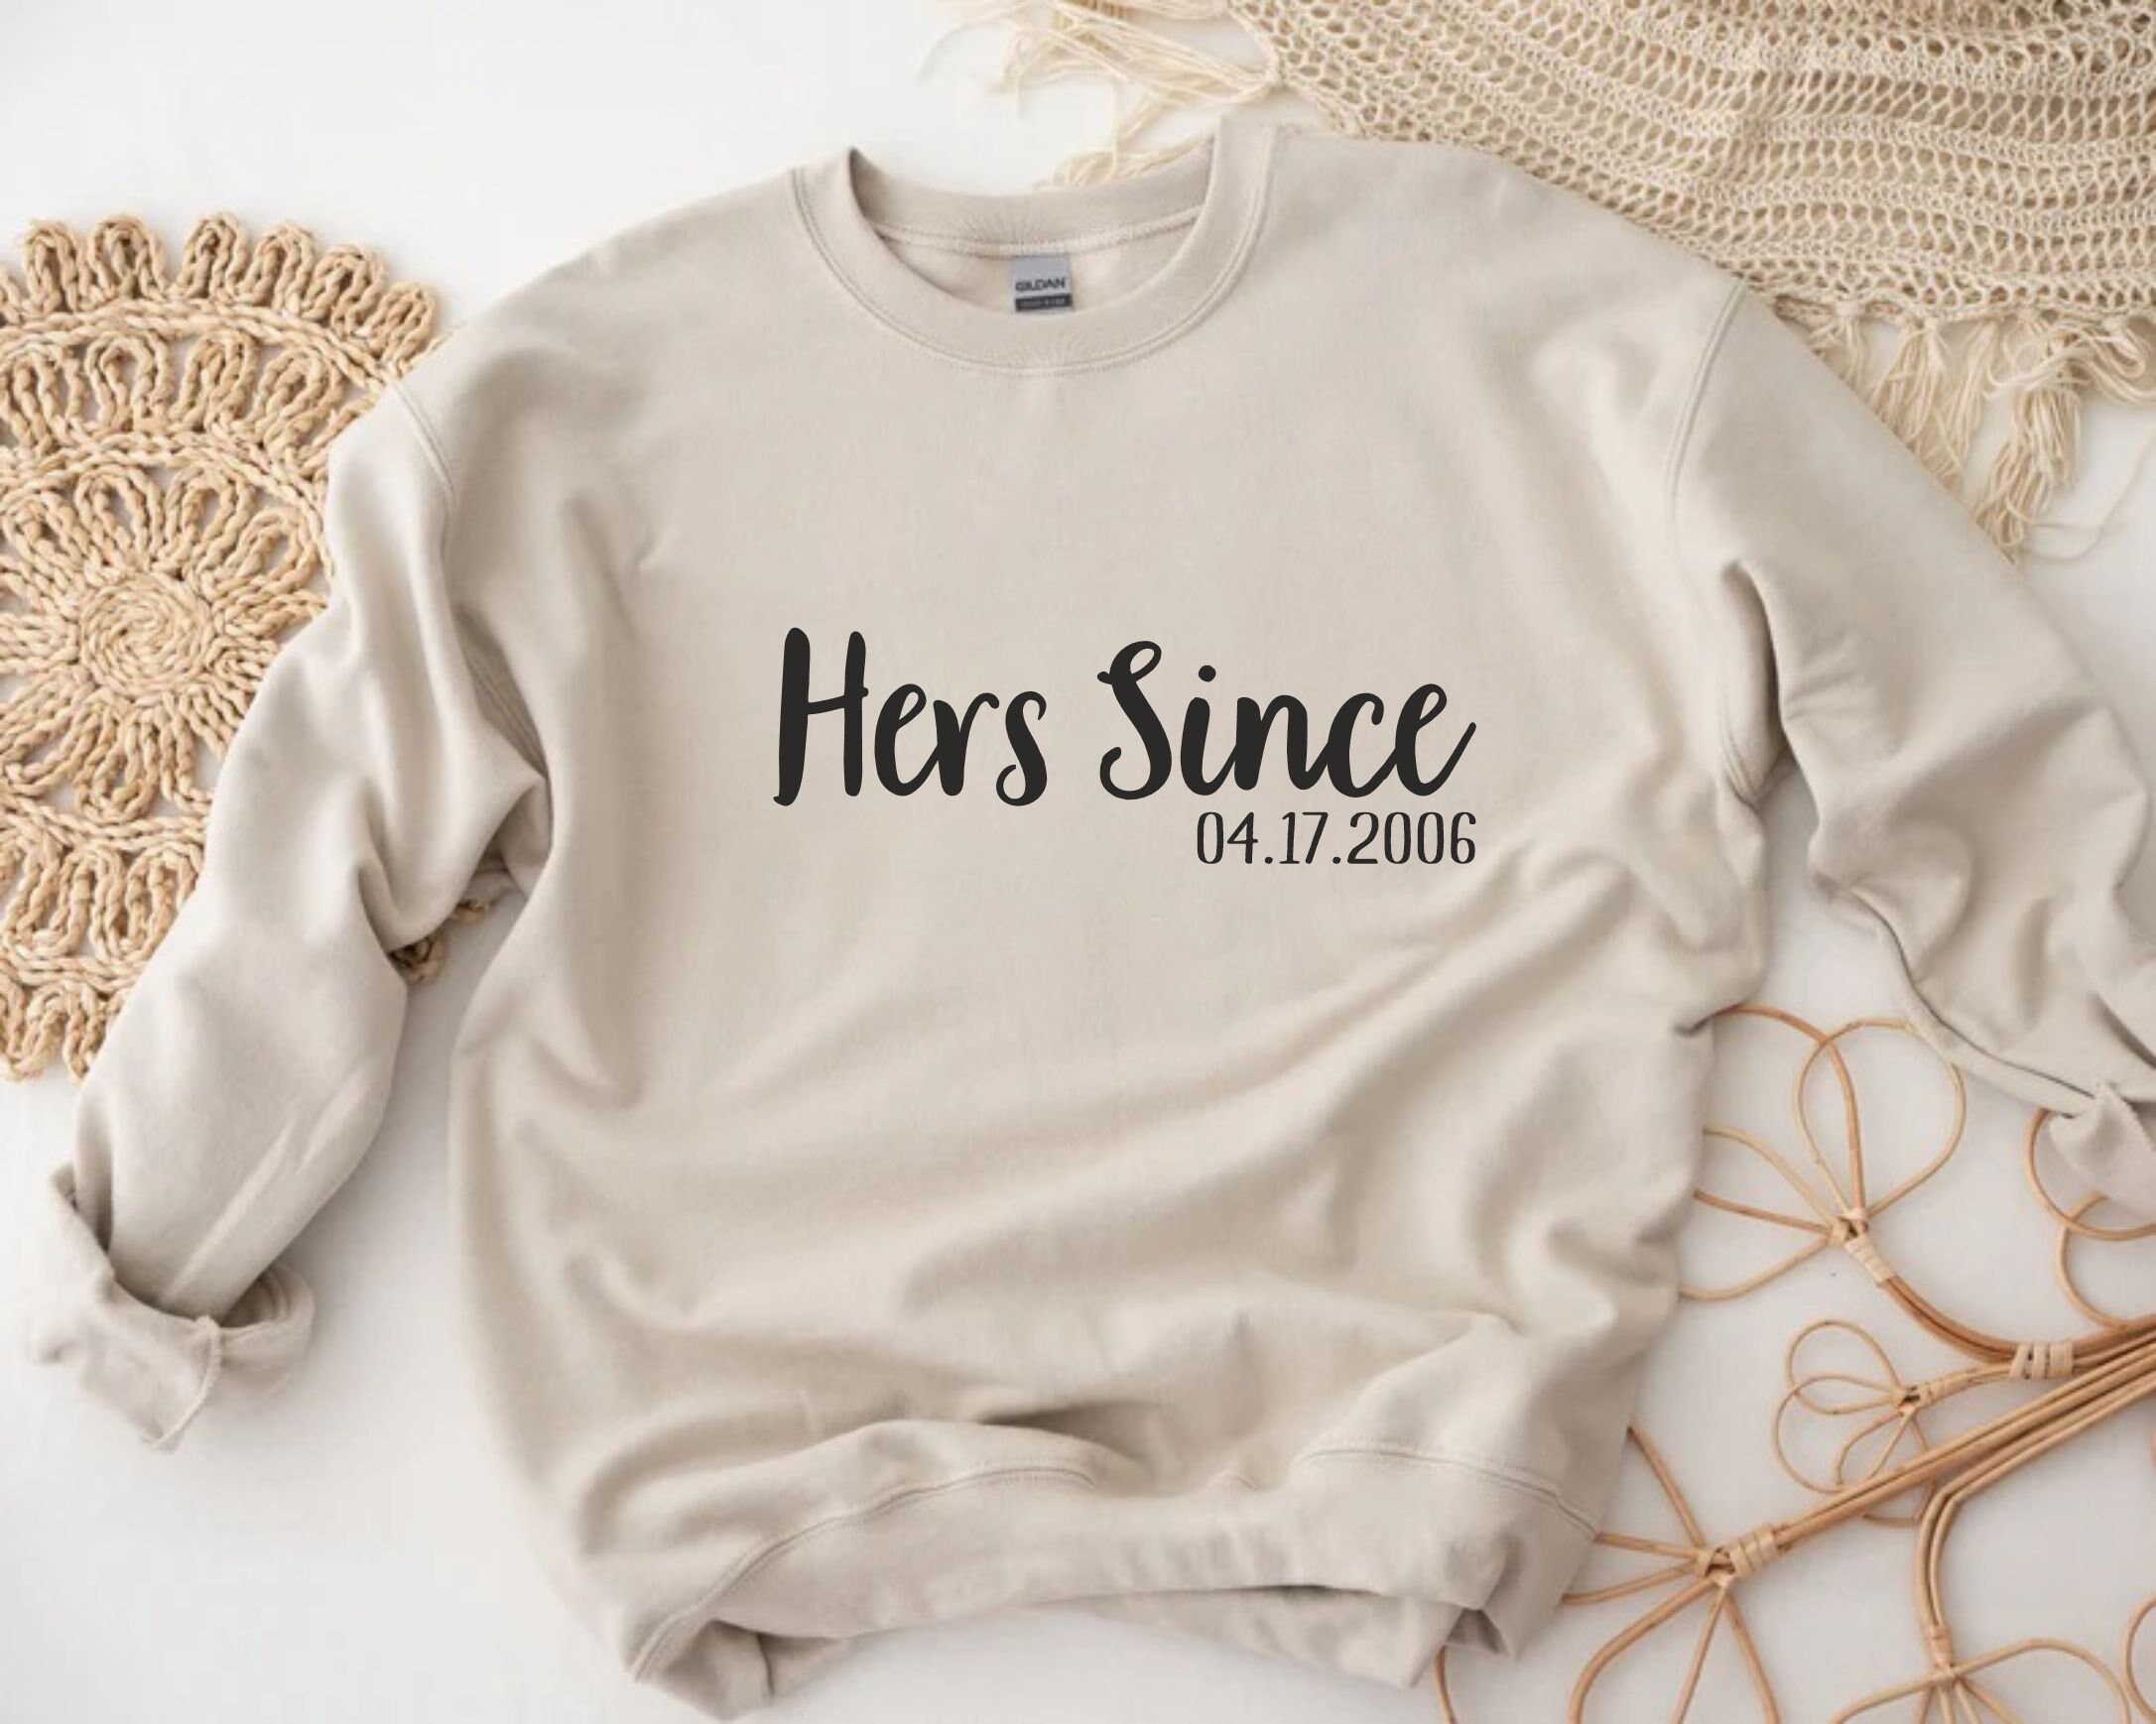 Discover Hers Since His Since Sweatshirts, Funny Couple Matching Tees, Custom Date Anniversary Gift, Husband And Wife Sweater, Gift For Valentine